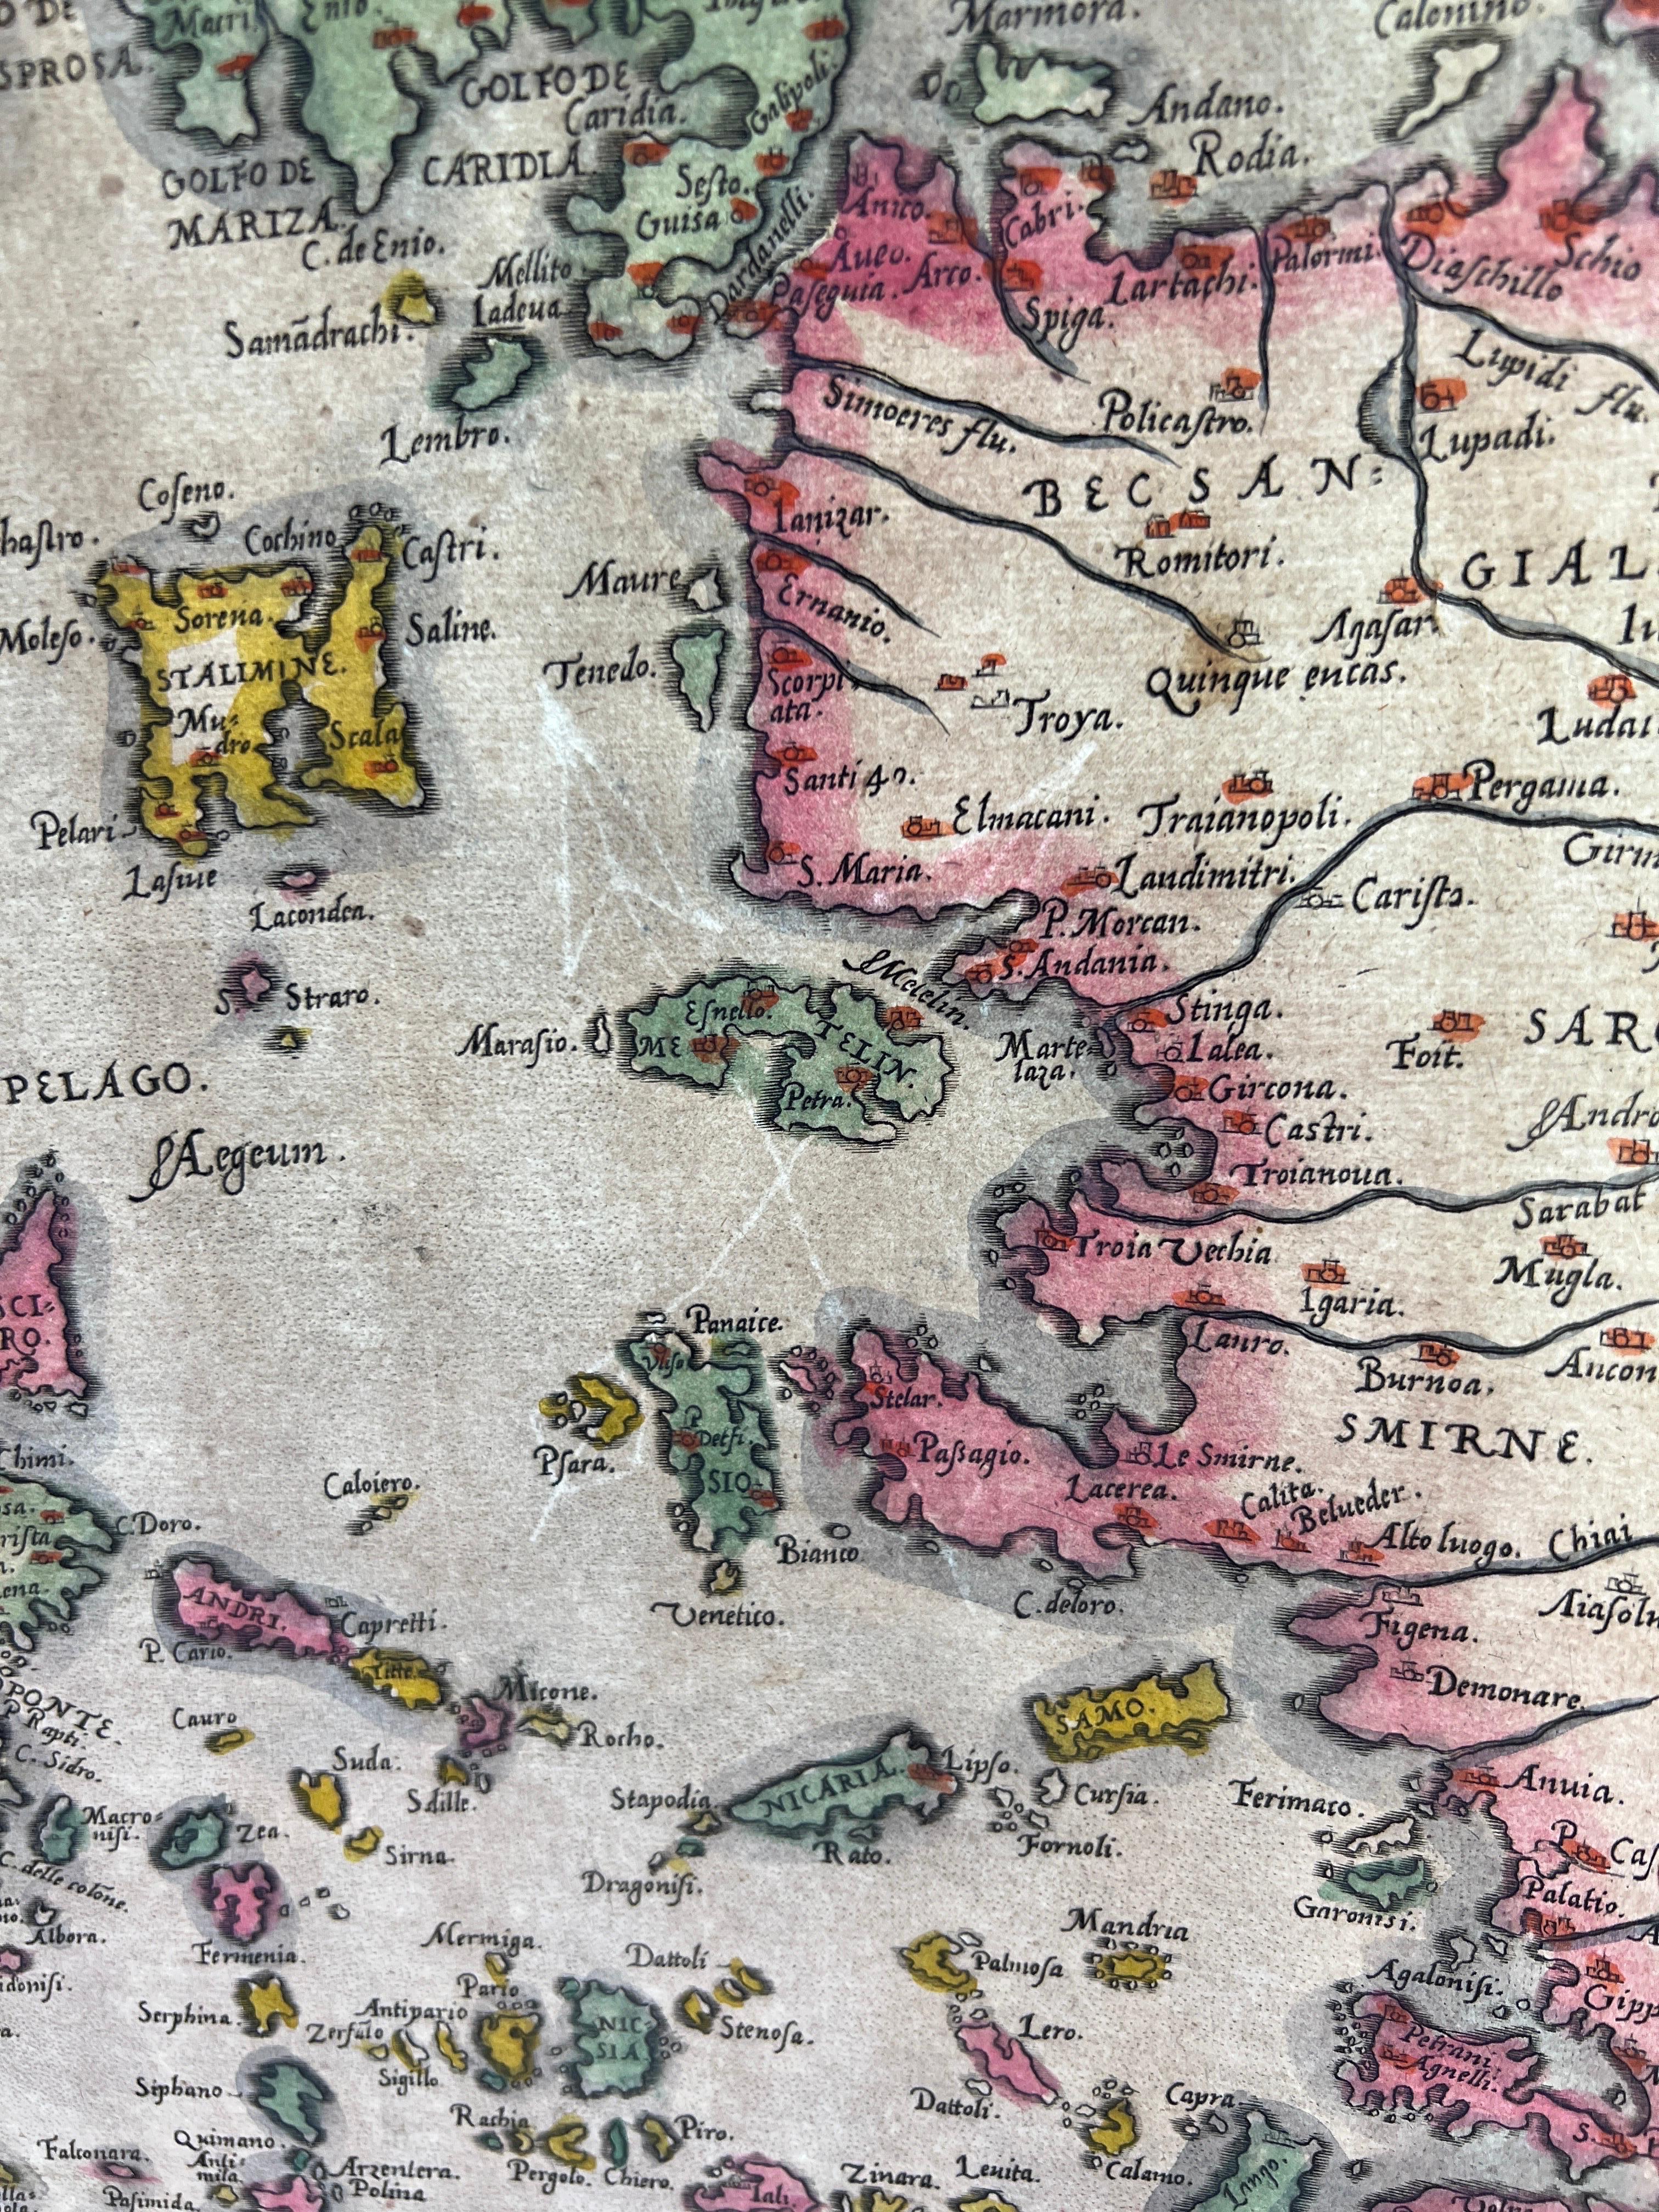 Paper Abraham Ortelius Map of Greece Hand Colored Engraving Circa 1579